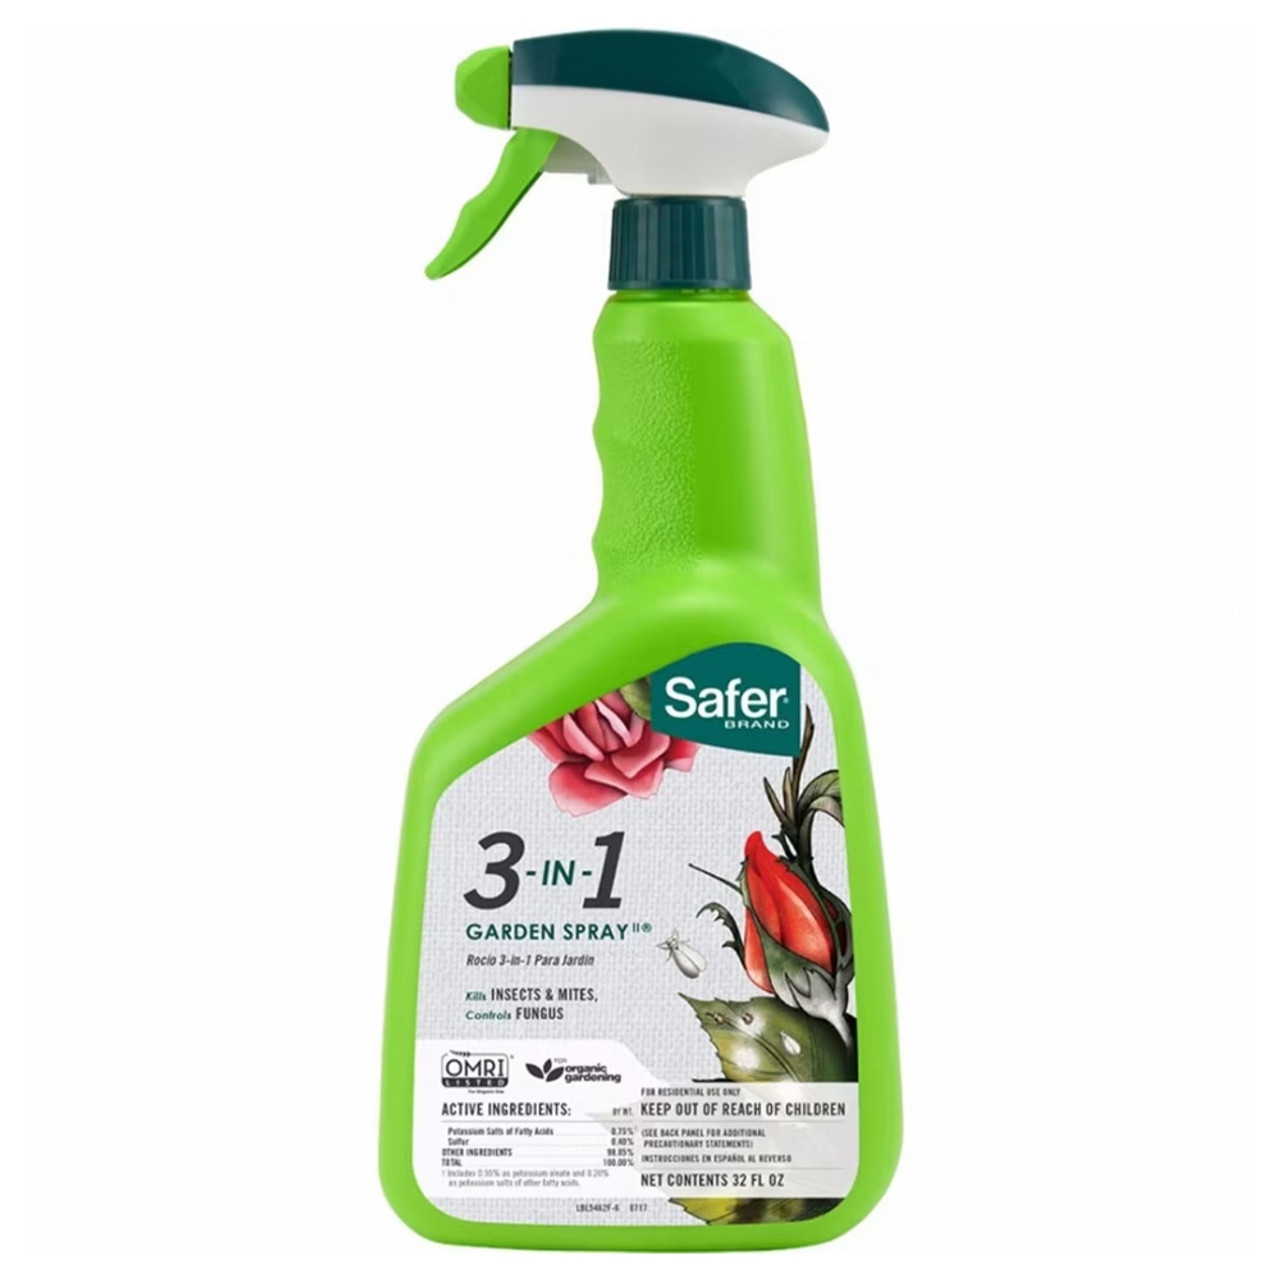 https://cdn11.bigcommerce.com/s-6ff03vil69/images/stencil/1280x1280/products/13175/32291/Safer_3-in-1_Organic_Garden_Insect_Spray_32oz_100081111__59430.1686165499.jpg?c=1